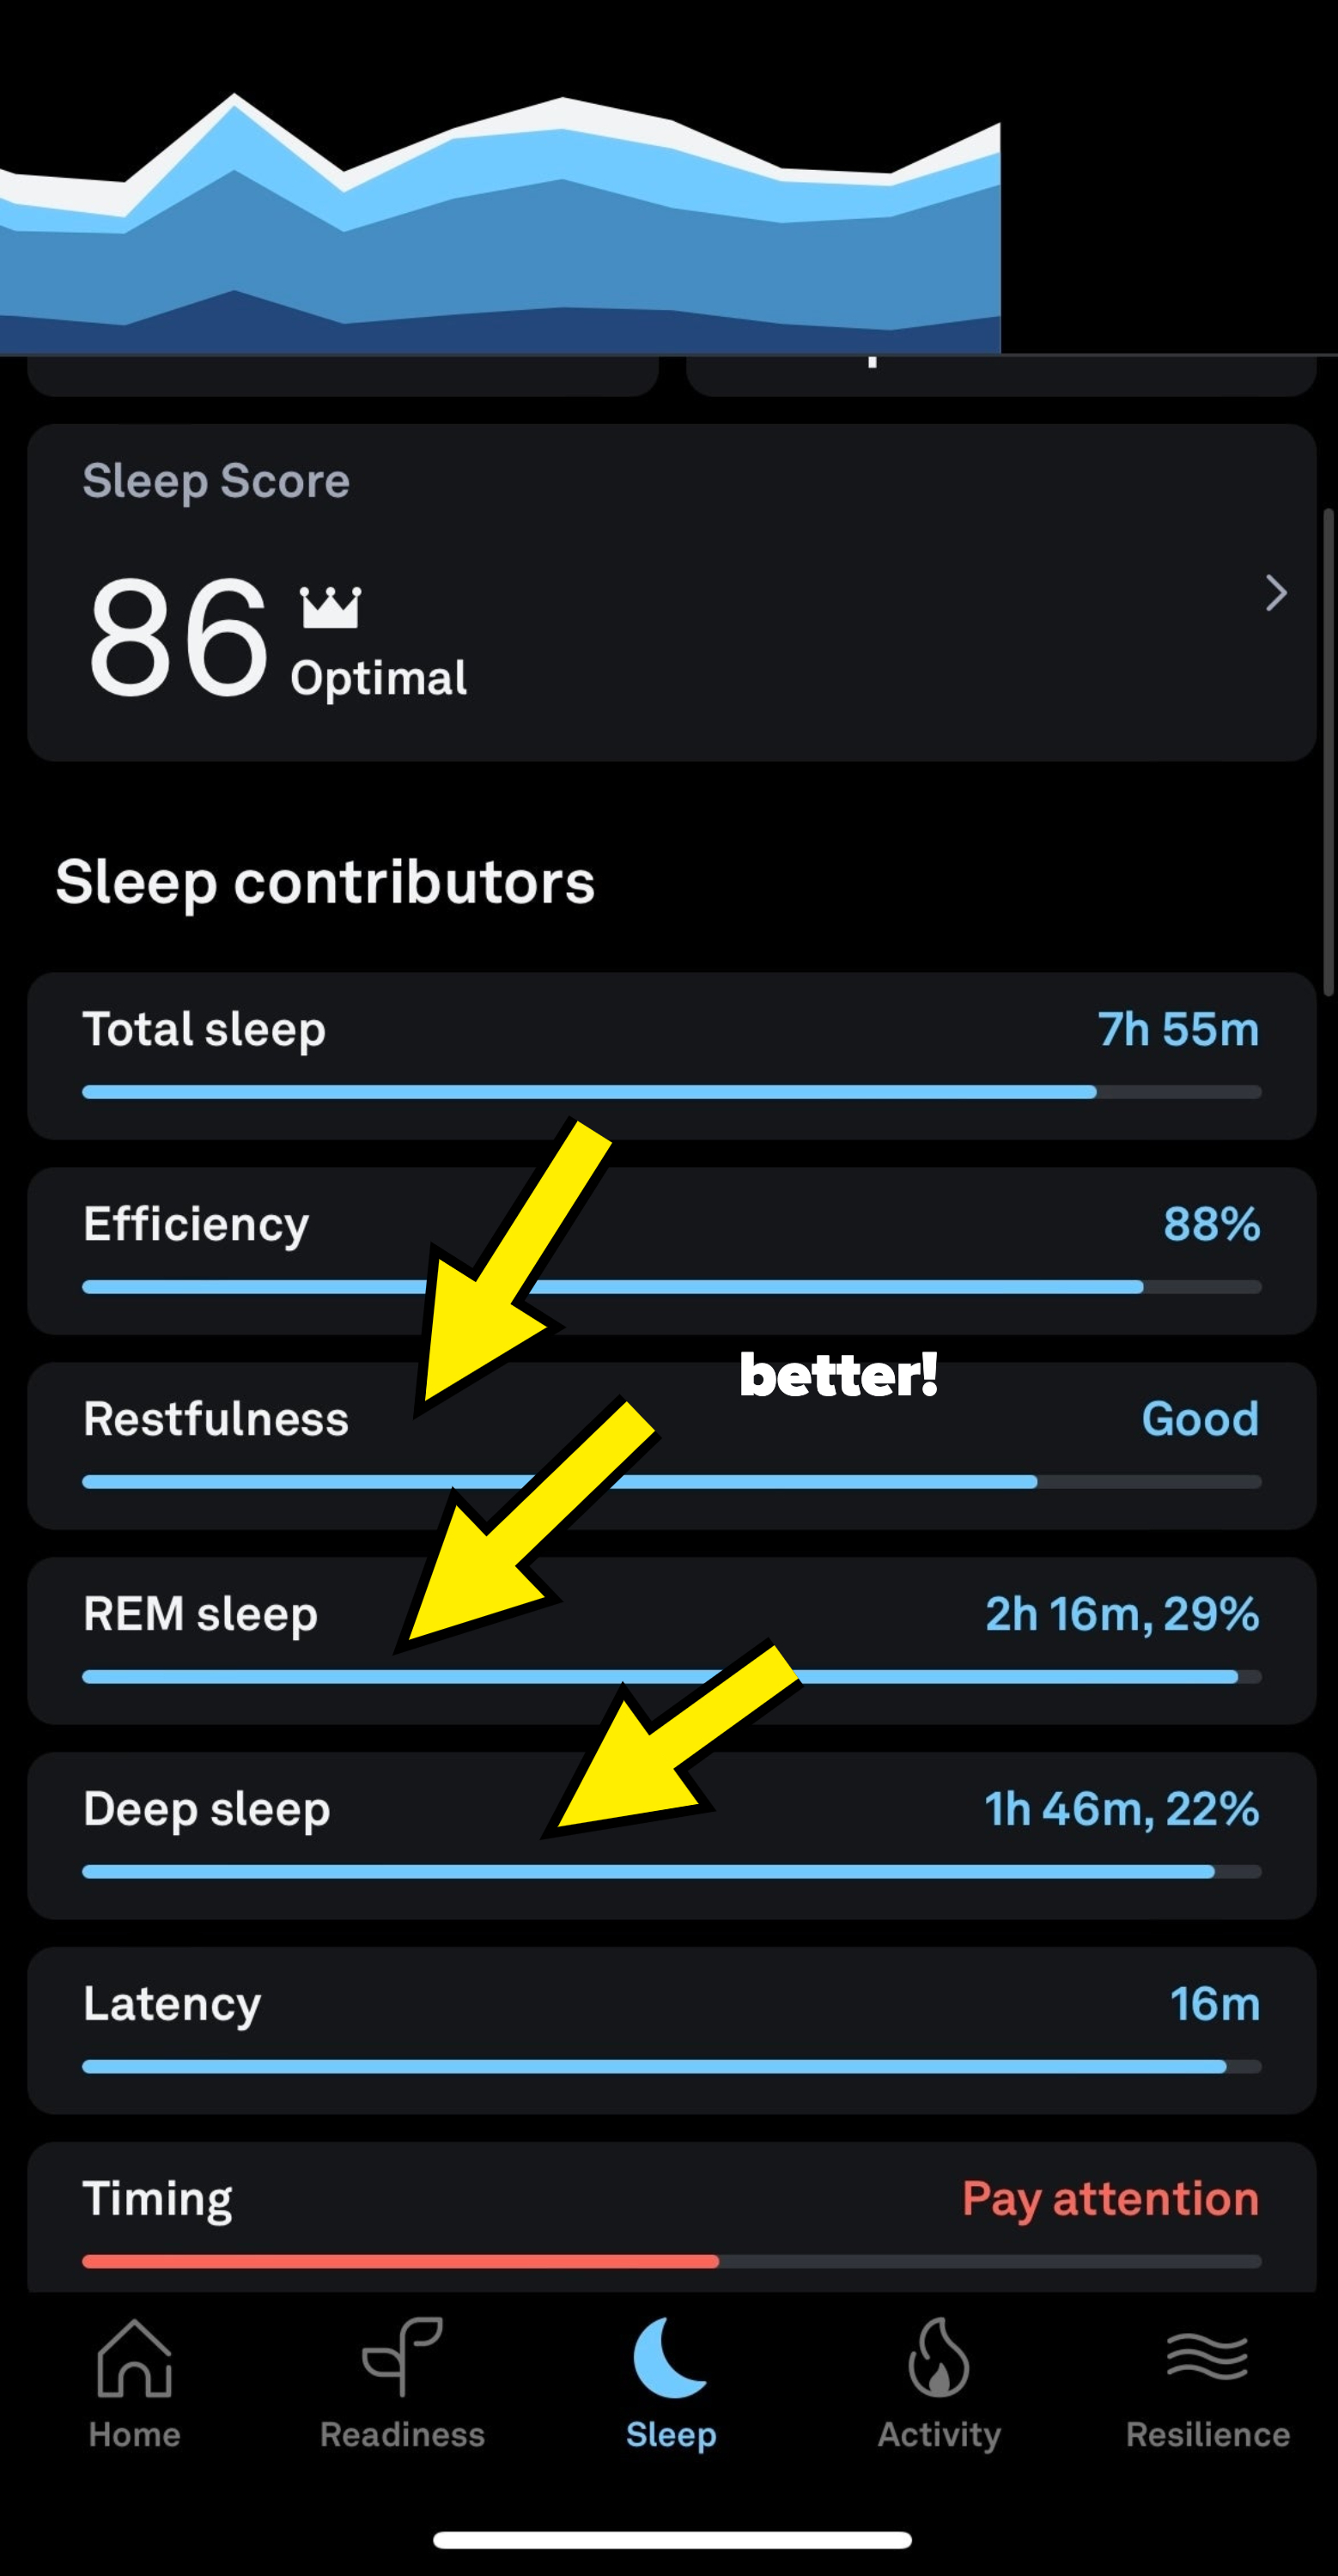 Sleep tracking app screenshot showing a sleep score of 86 with detailed sleep stage contributions